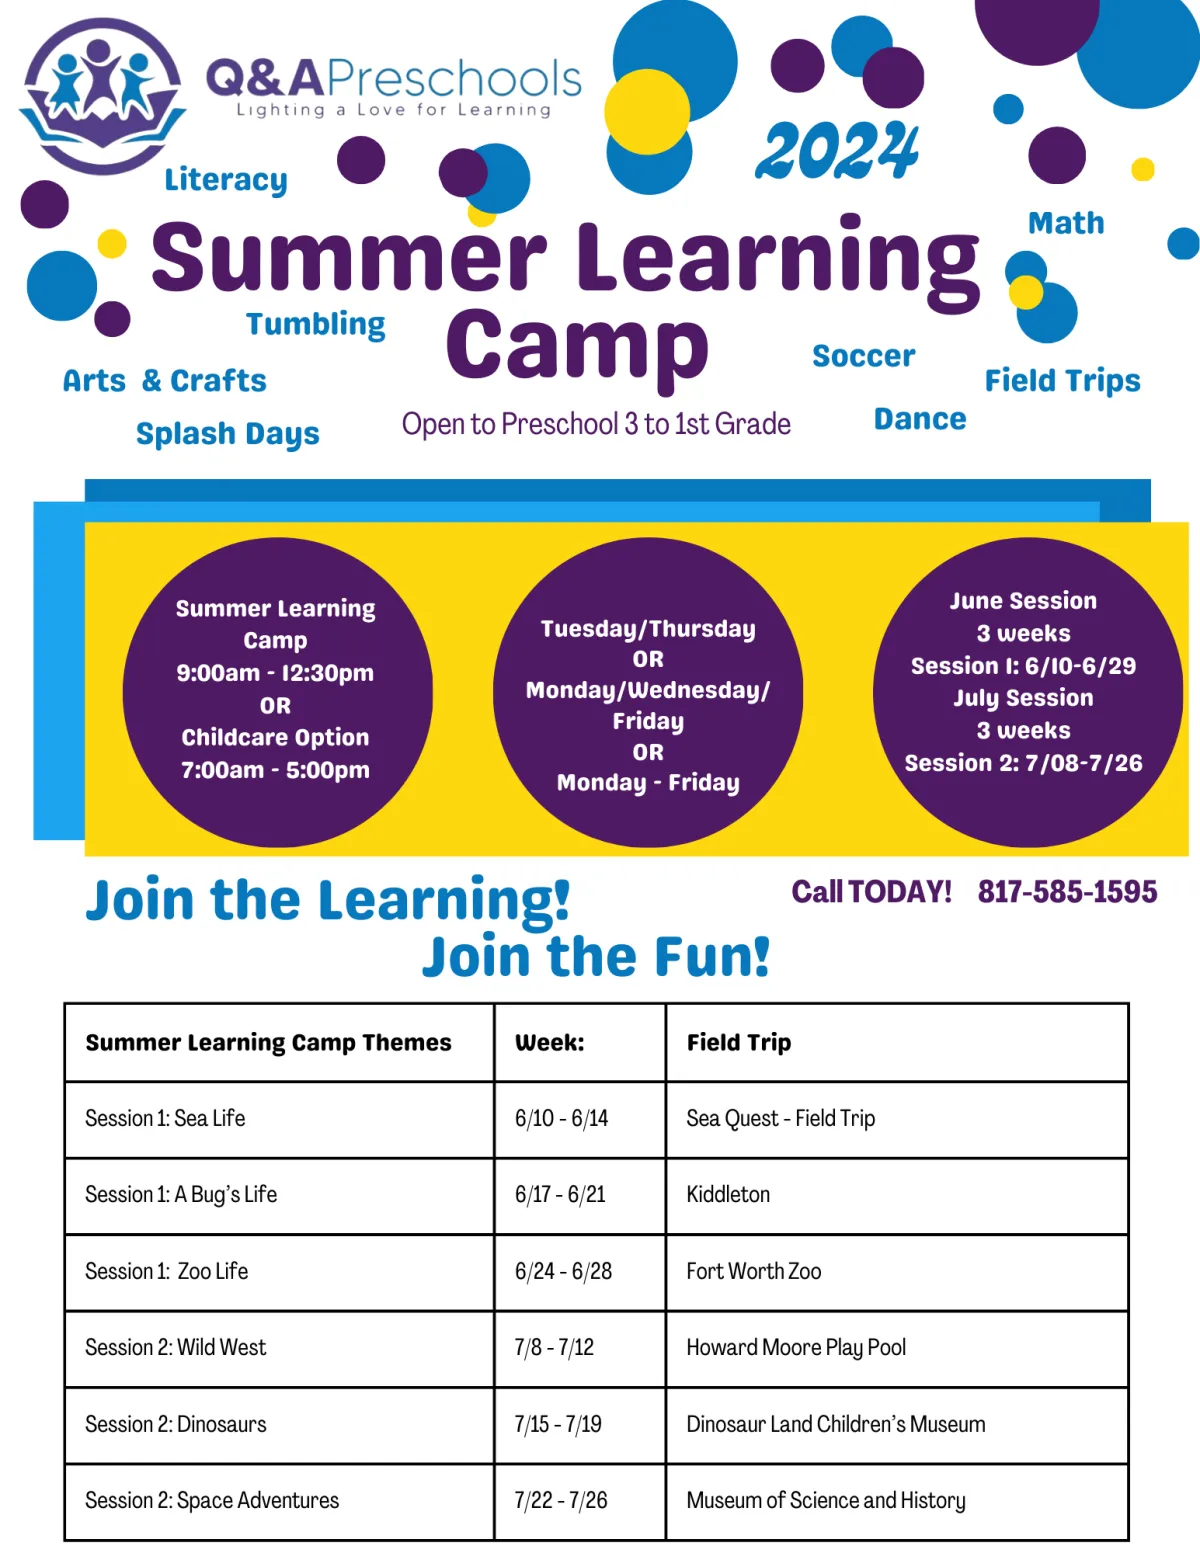 Summer Camp schedule of event and themes